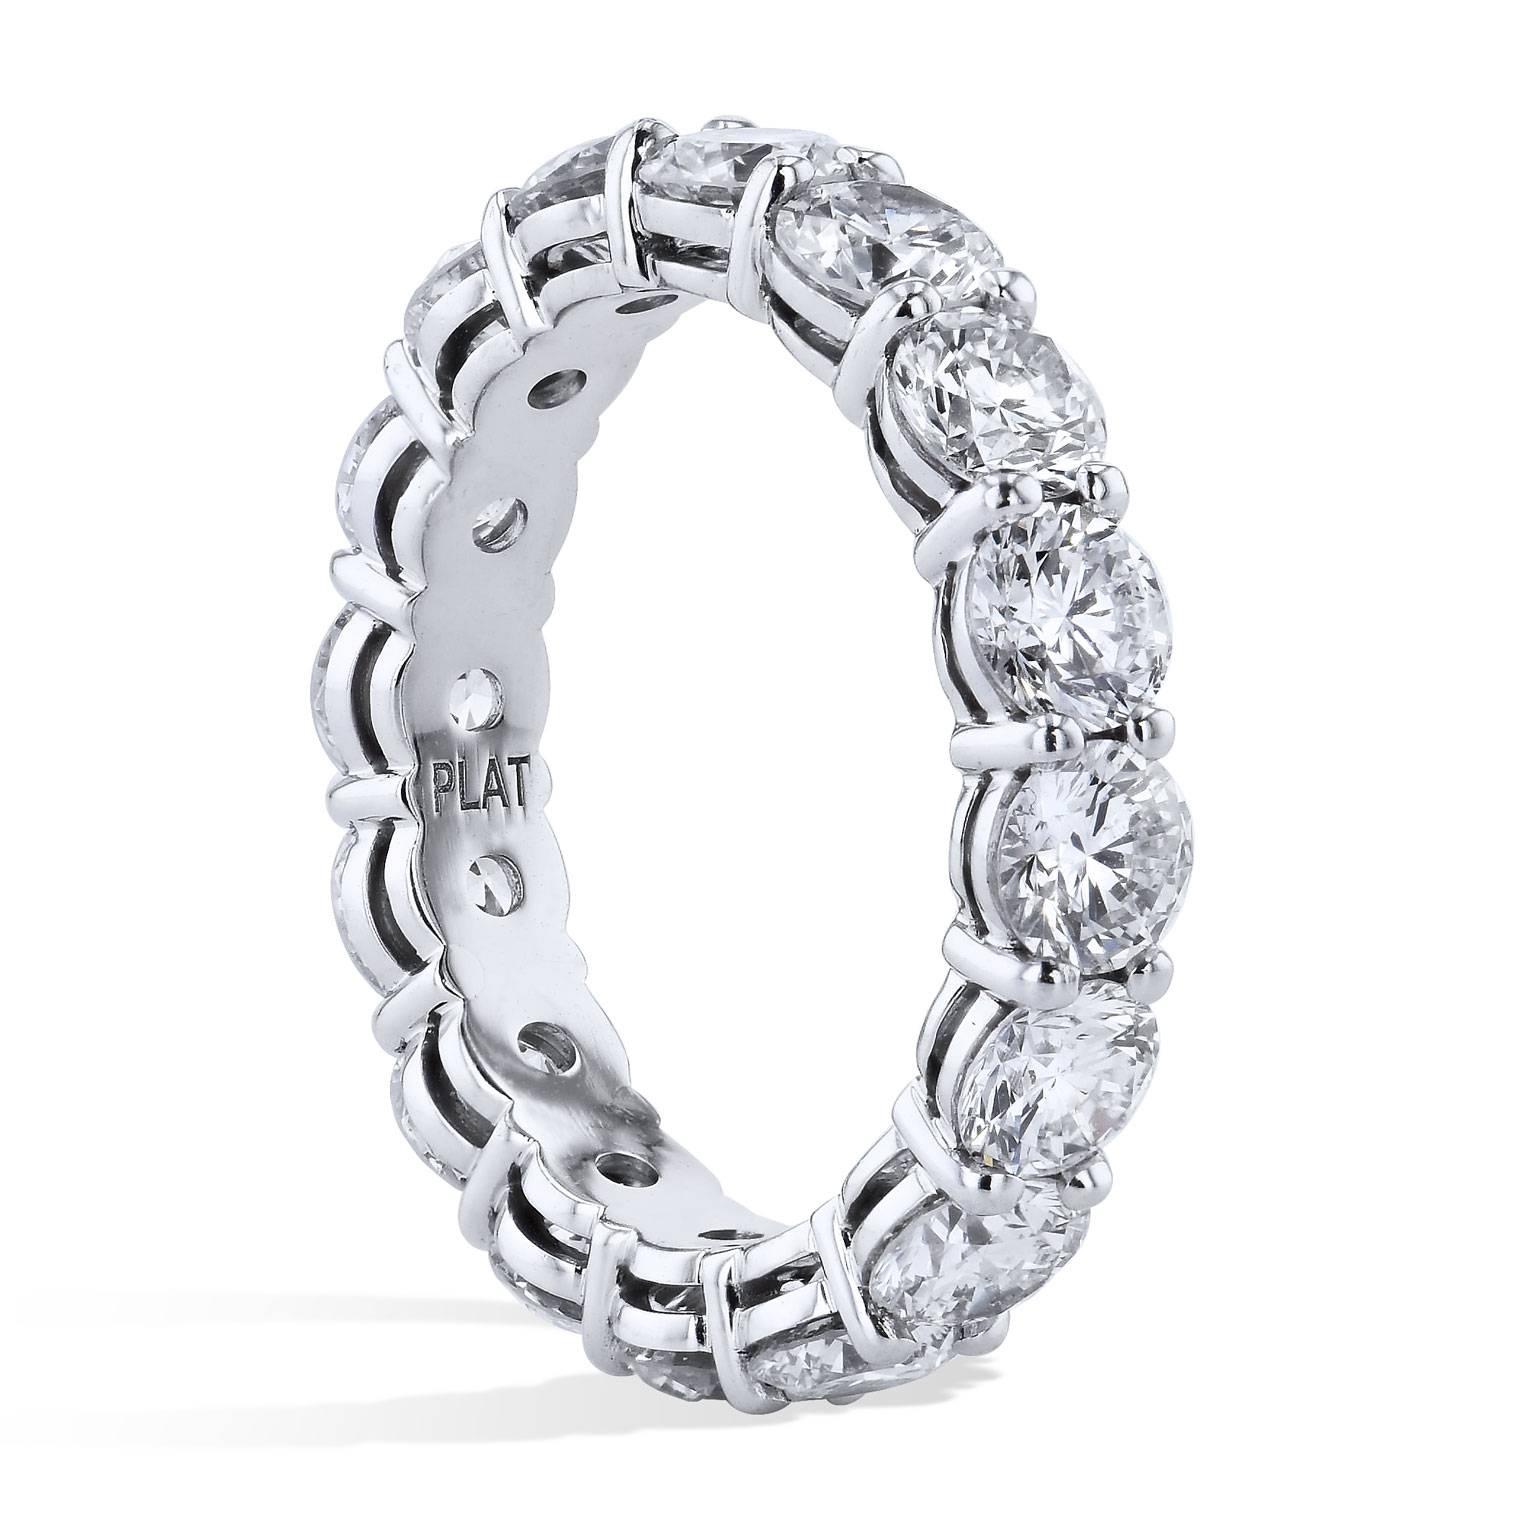 Platinum eternity band featuring sixteen round brilliant cut diamonds in shared-prong setting with a total weight of 4.27 carat (G/VS2/SI1).